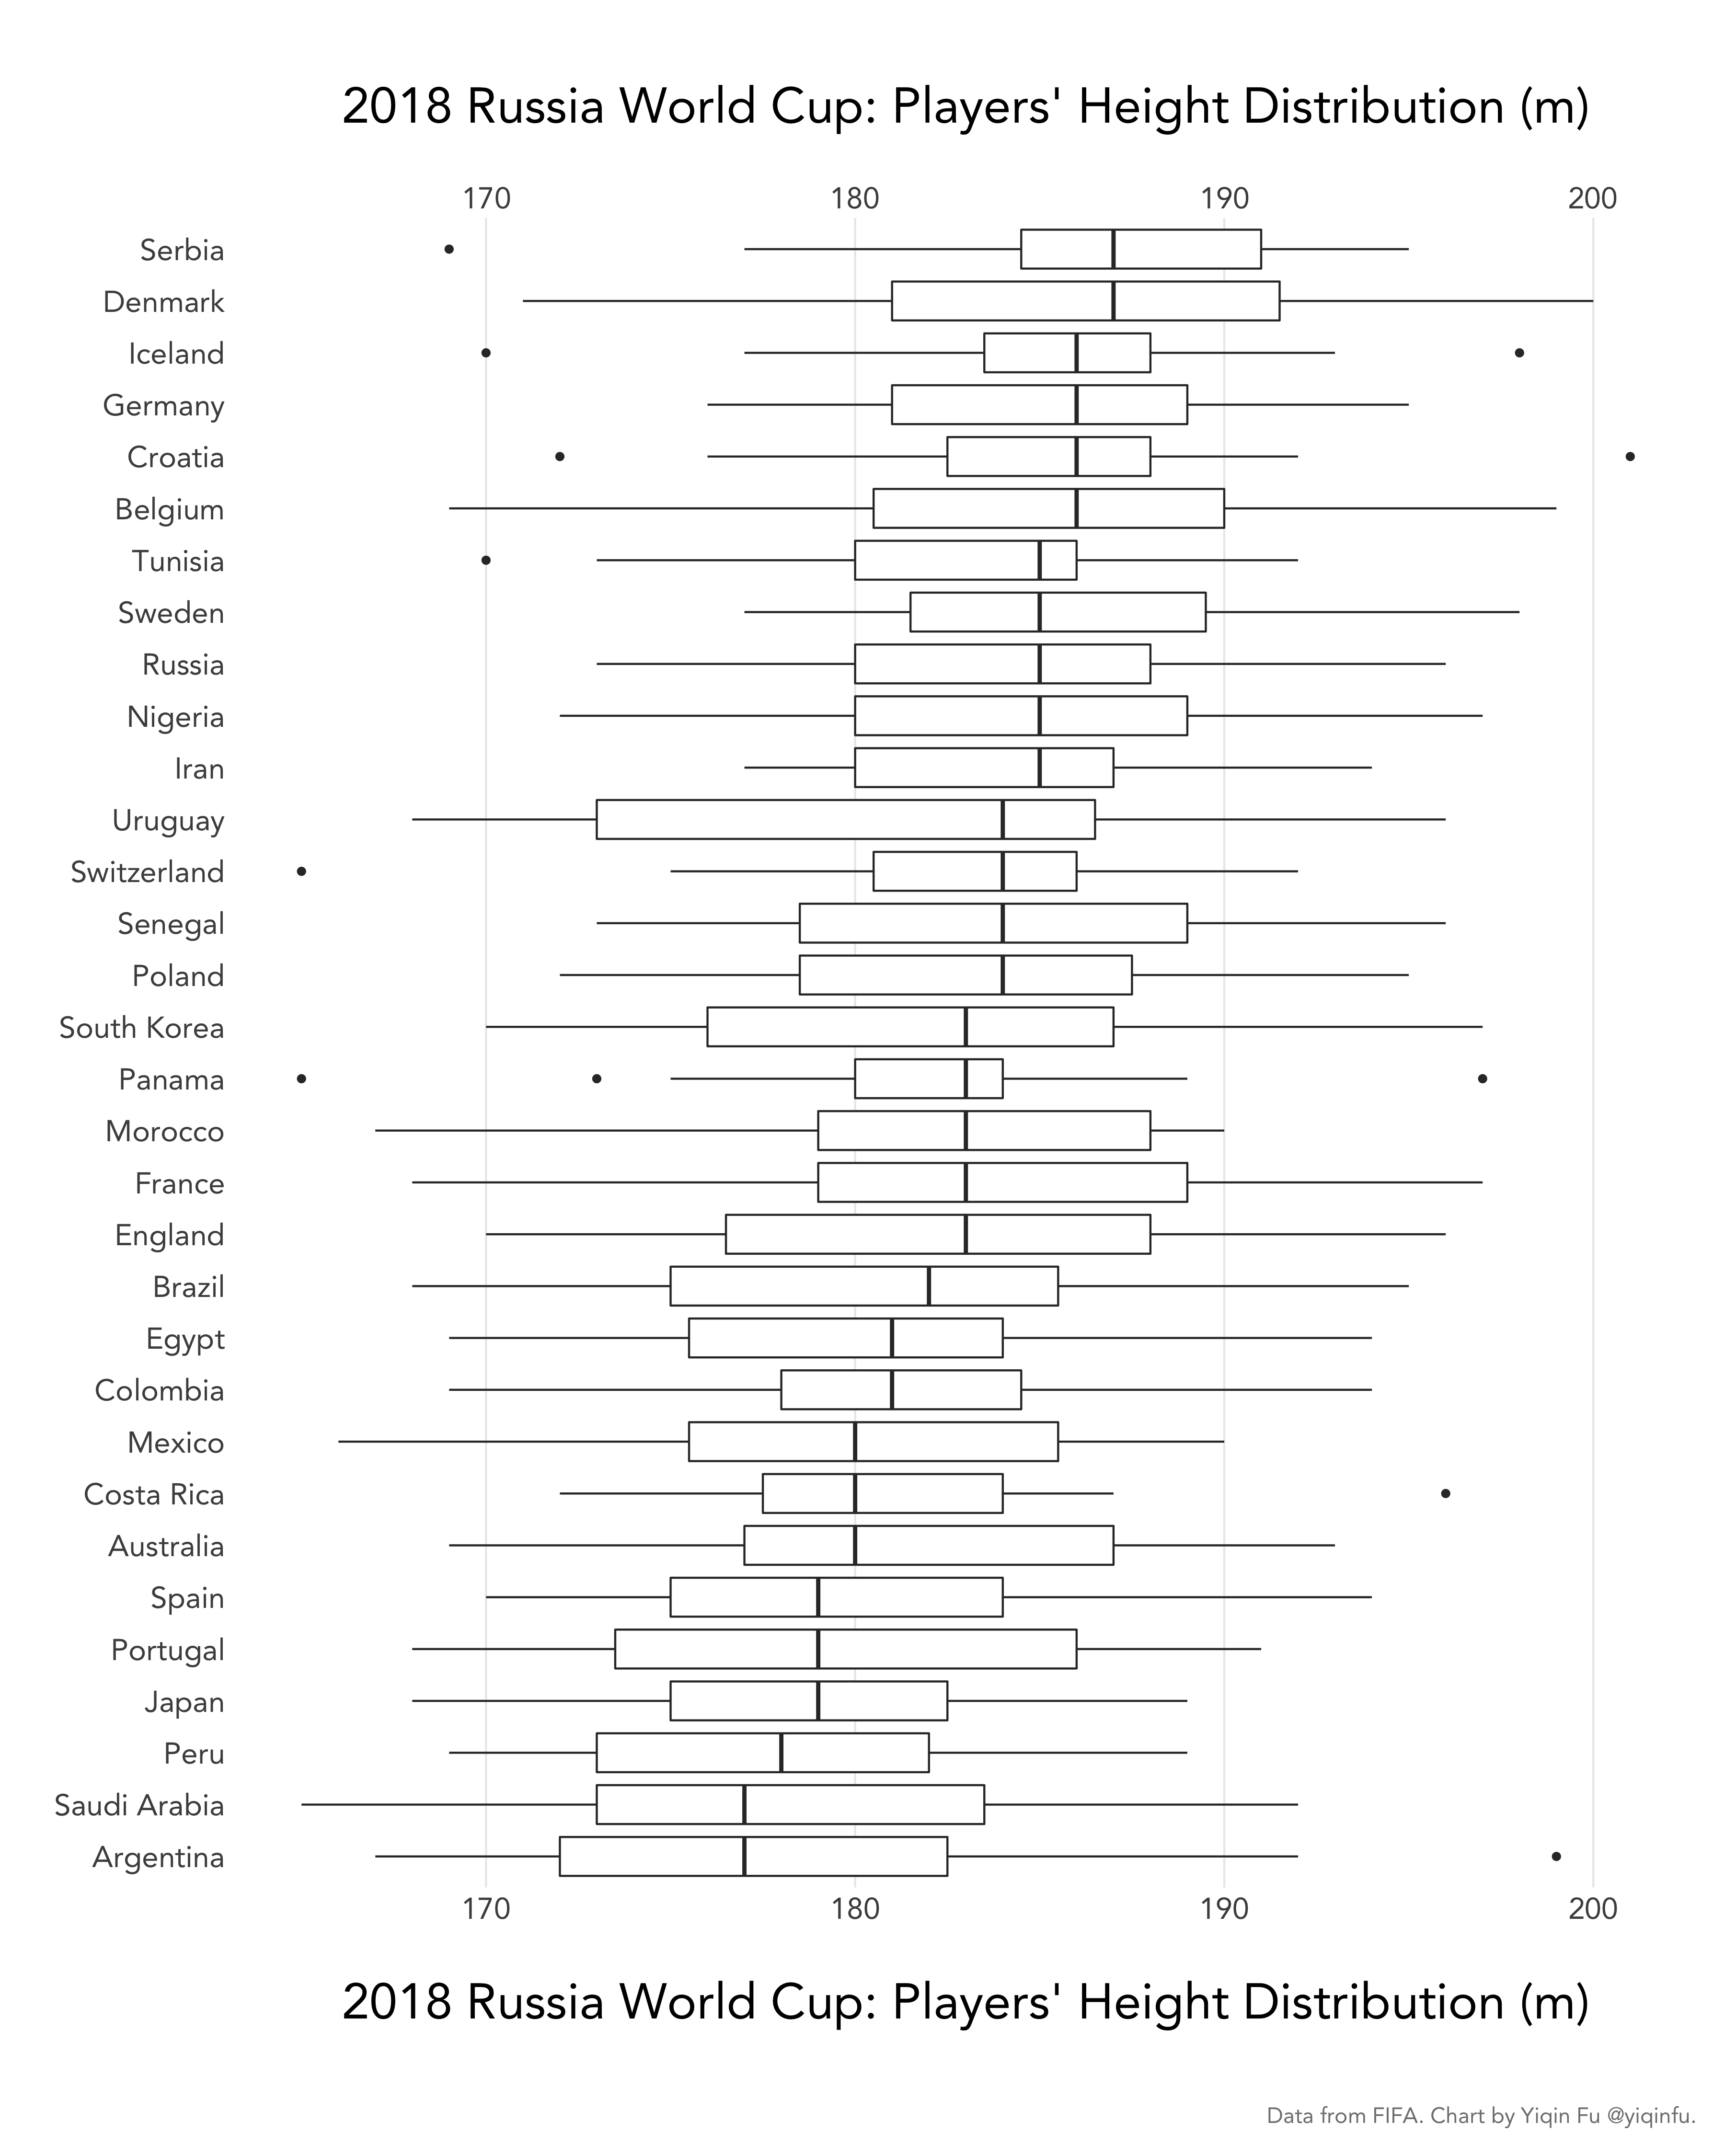 height_boxplot_by_country